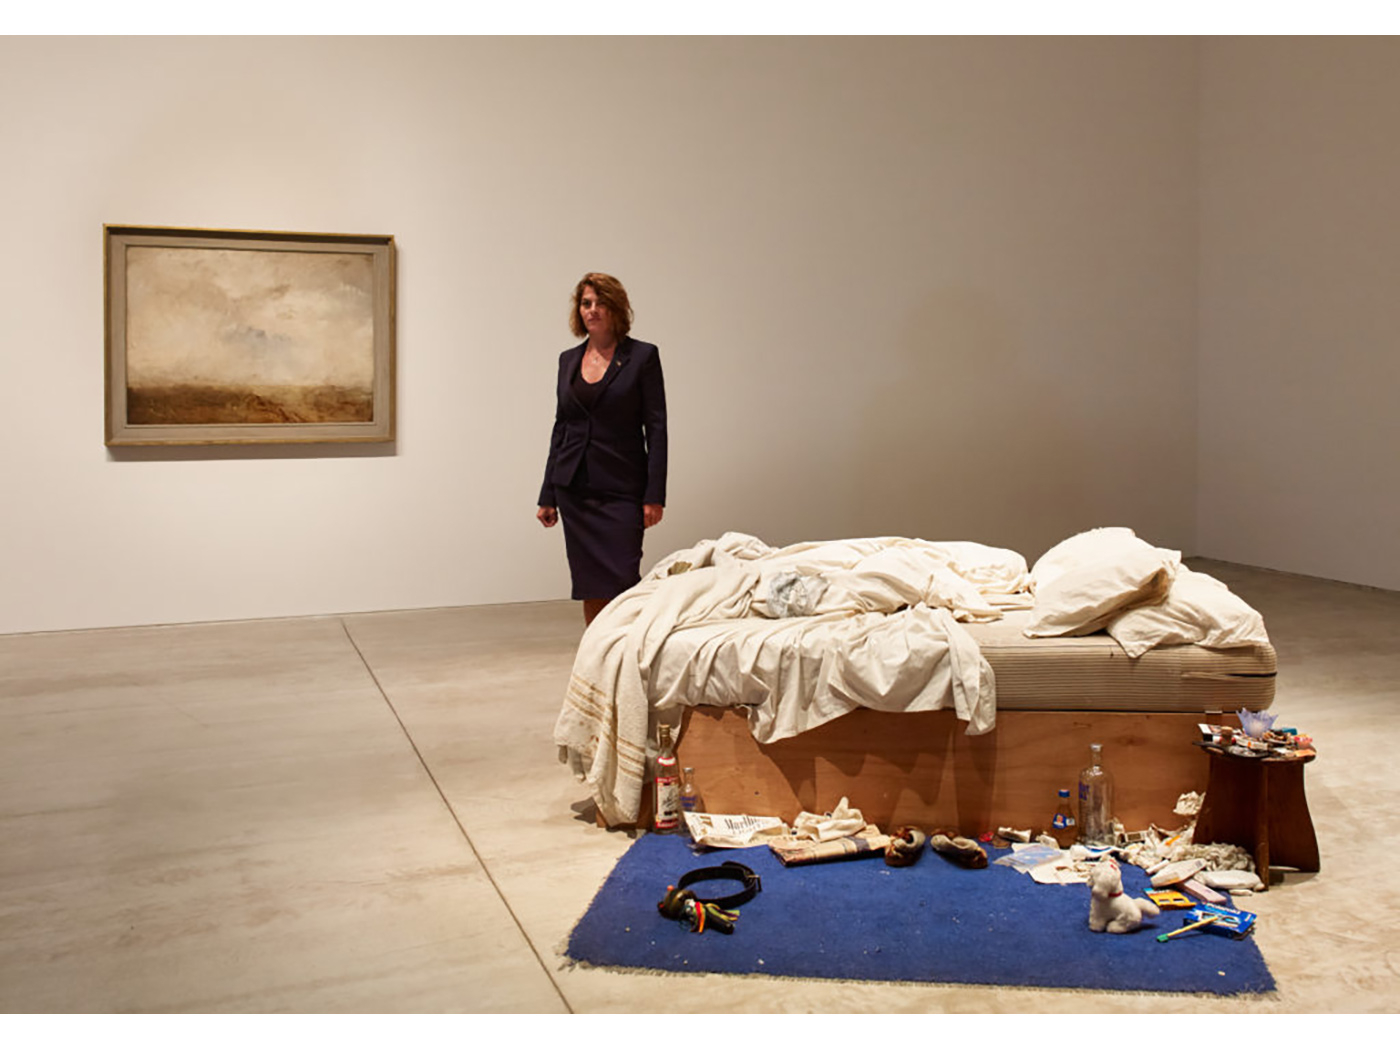 In 1999 Tracey Emin was nominated for the Turner Prize for her notorious piece 'My Bed' (1998) - seen here installed at Turner Contemporary, Margate, 2017. This iconic work is referenced in her print 'On my Knees' (2021).